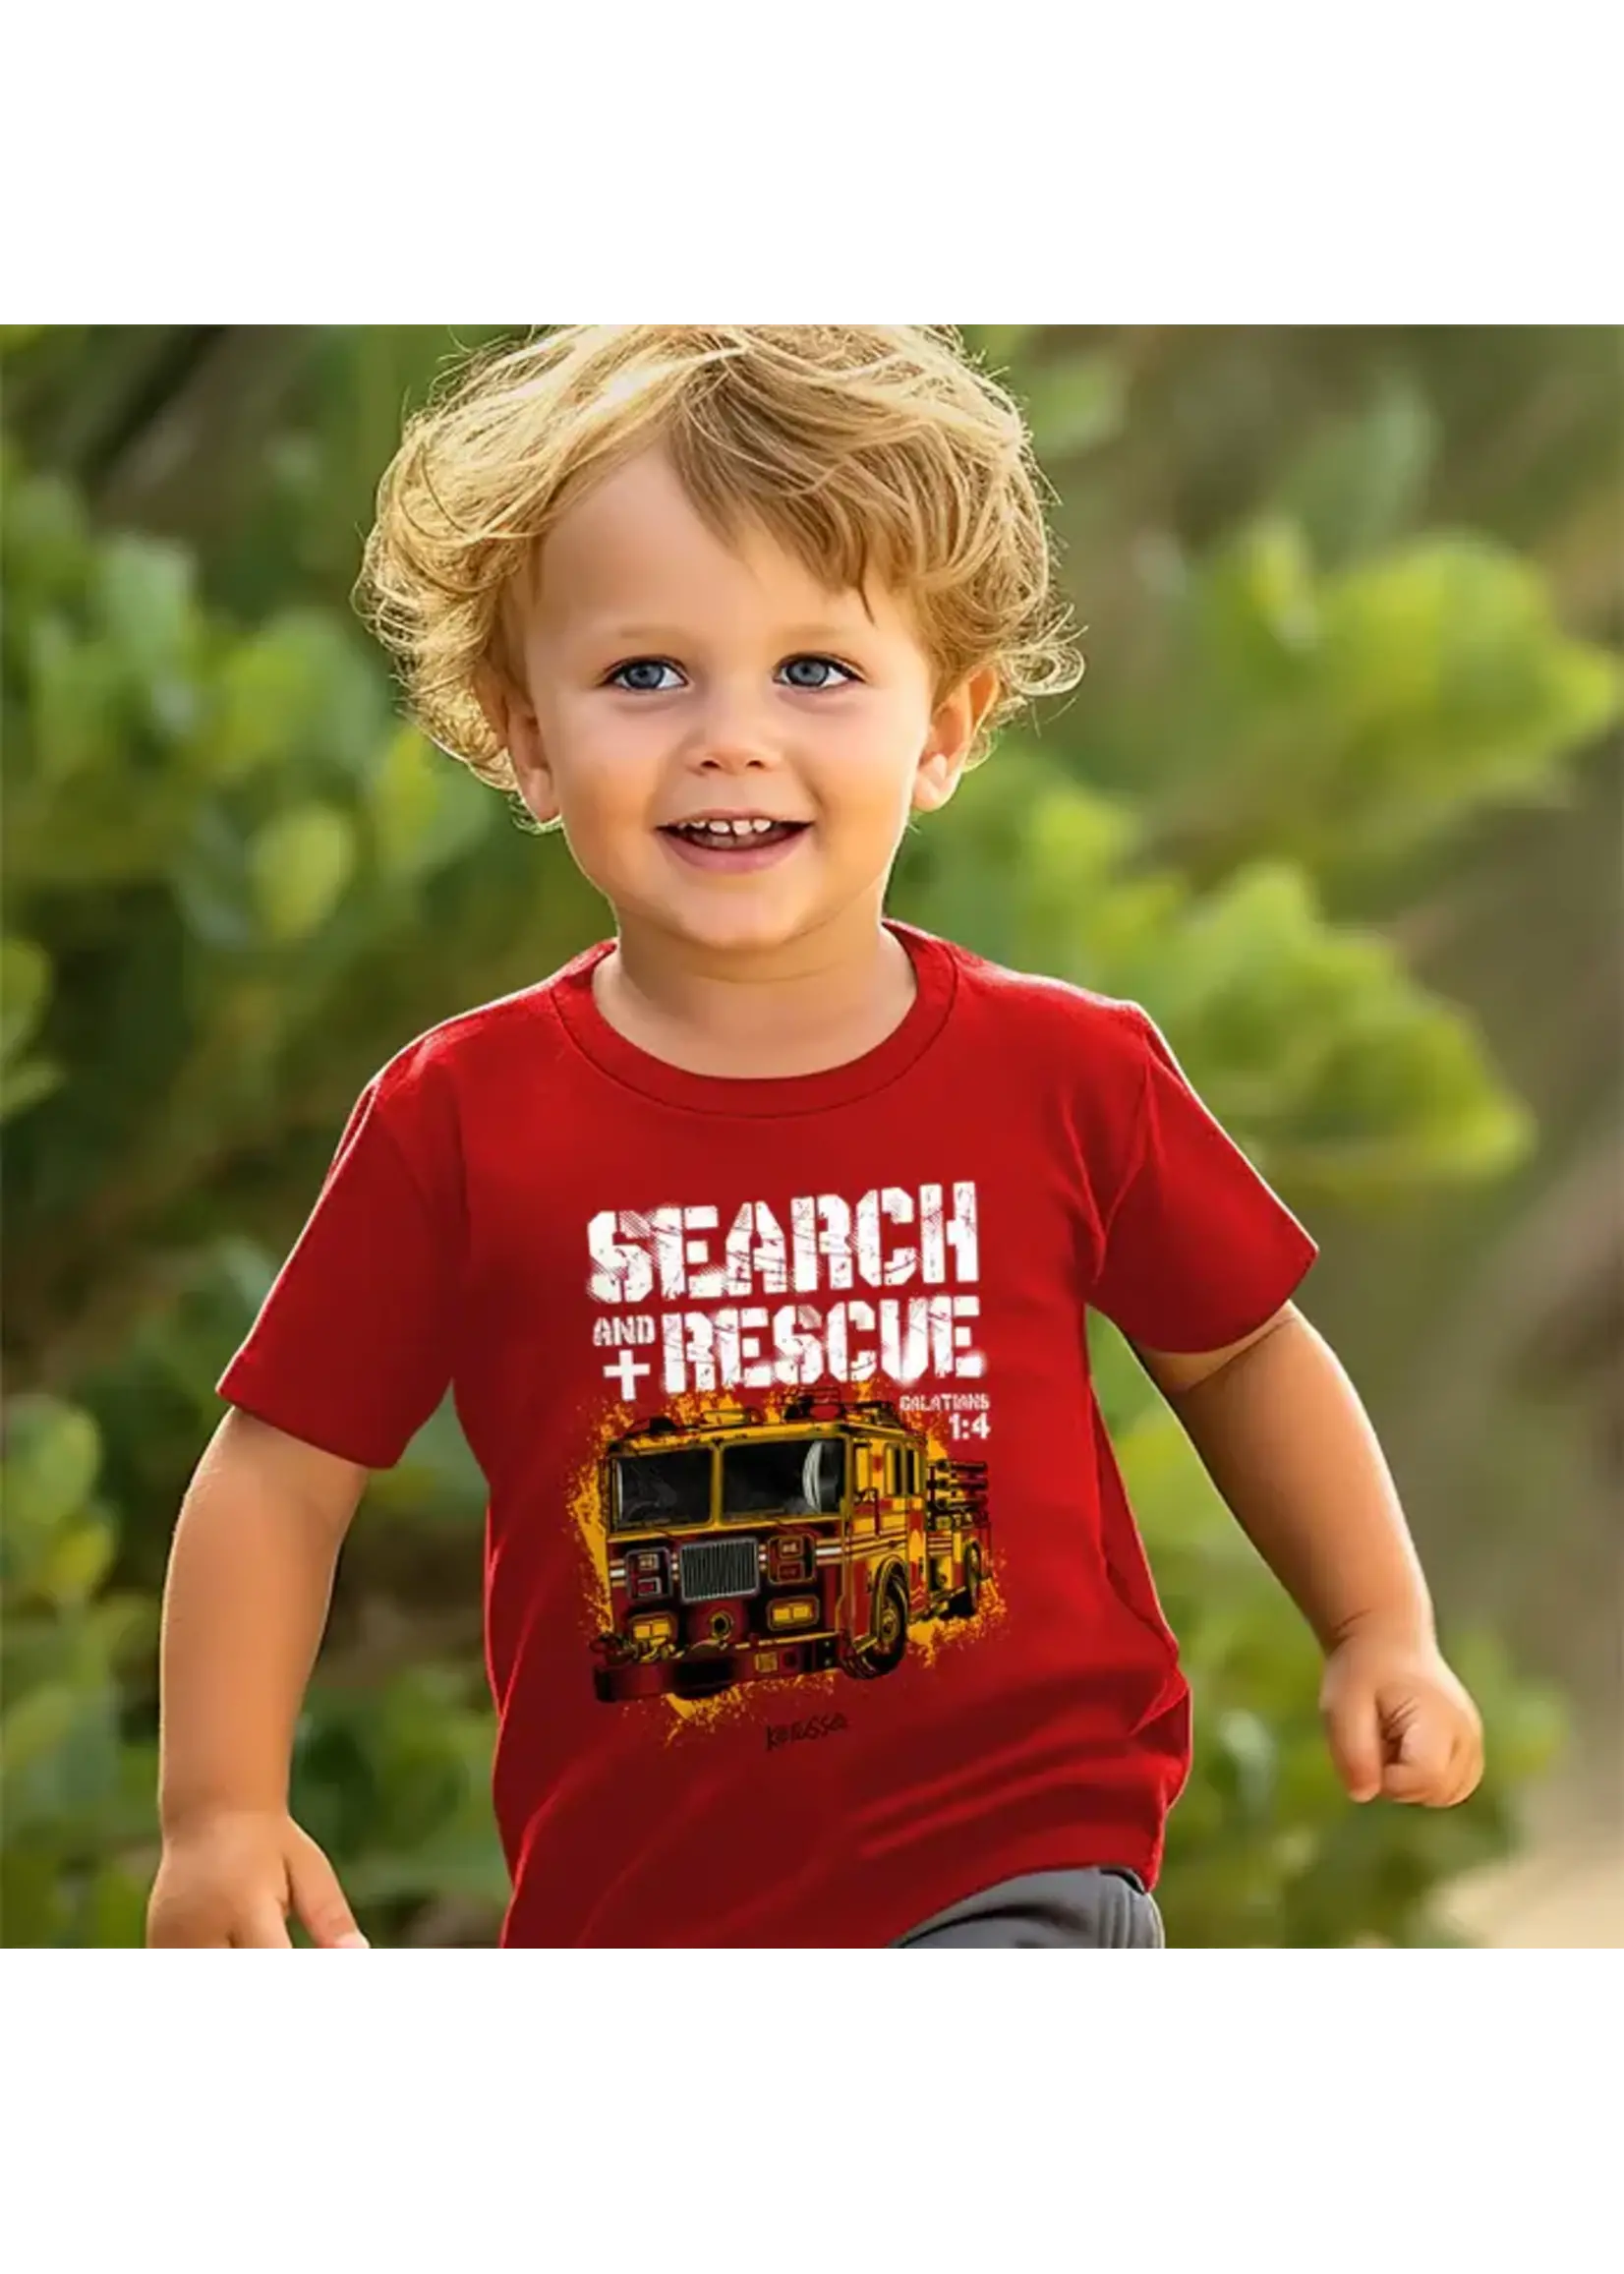 "Search and Rescue" Kid's Tee